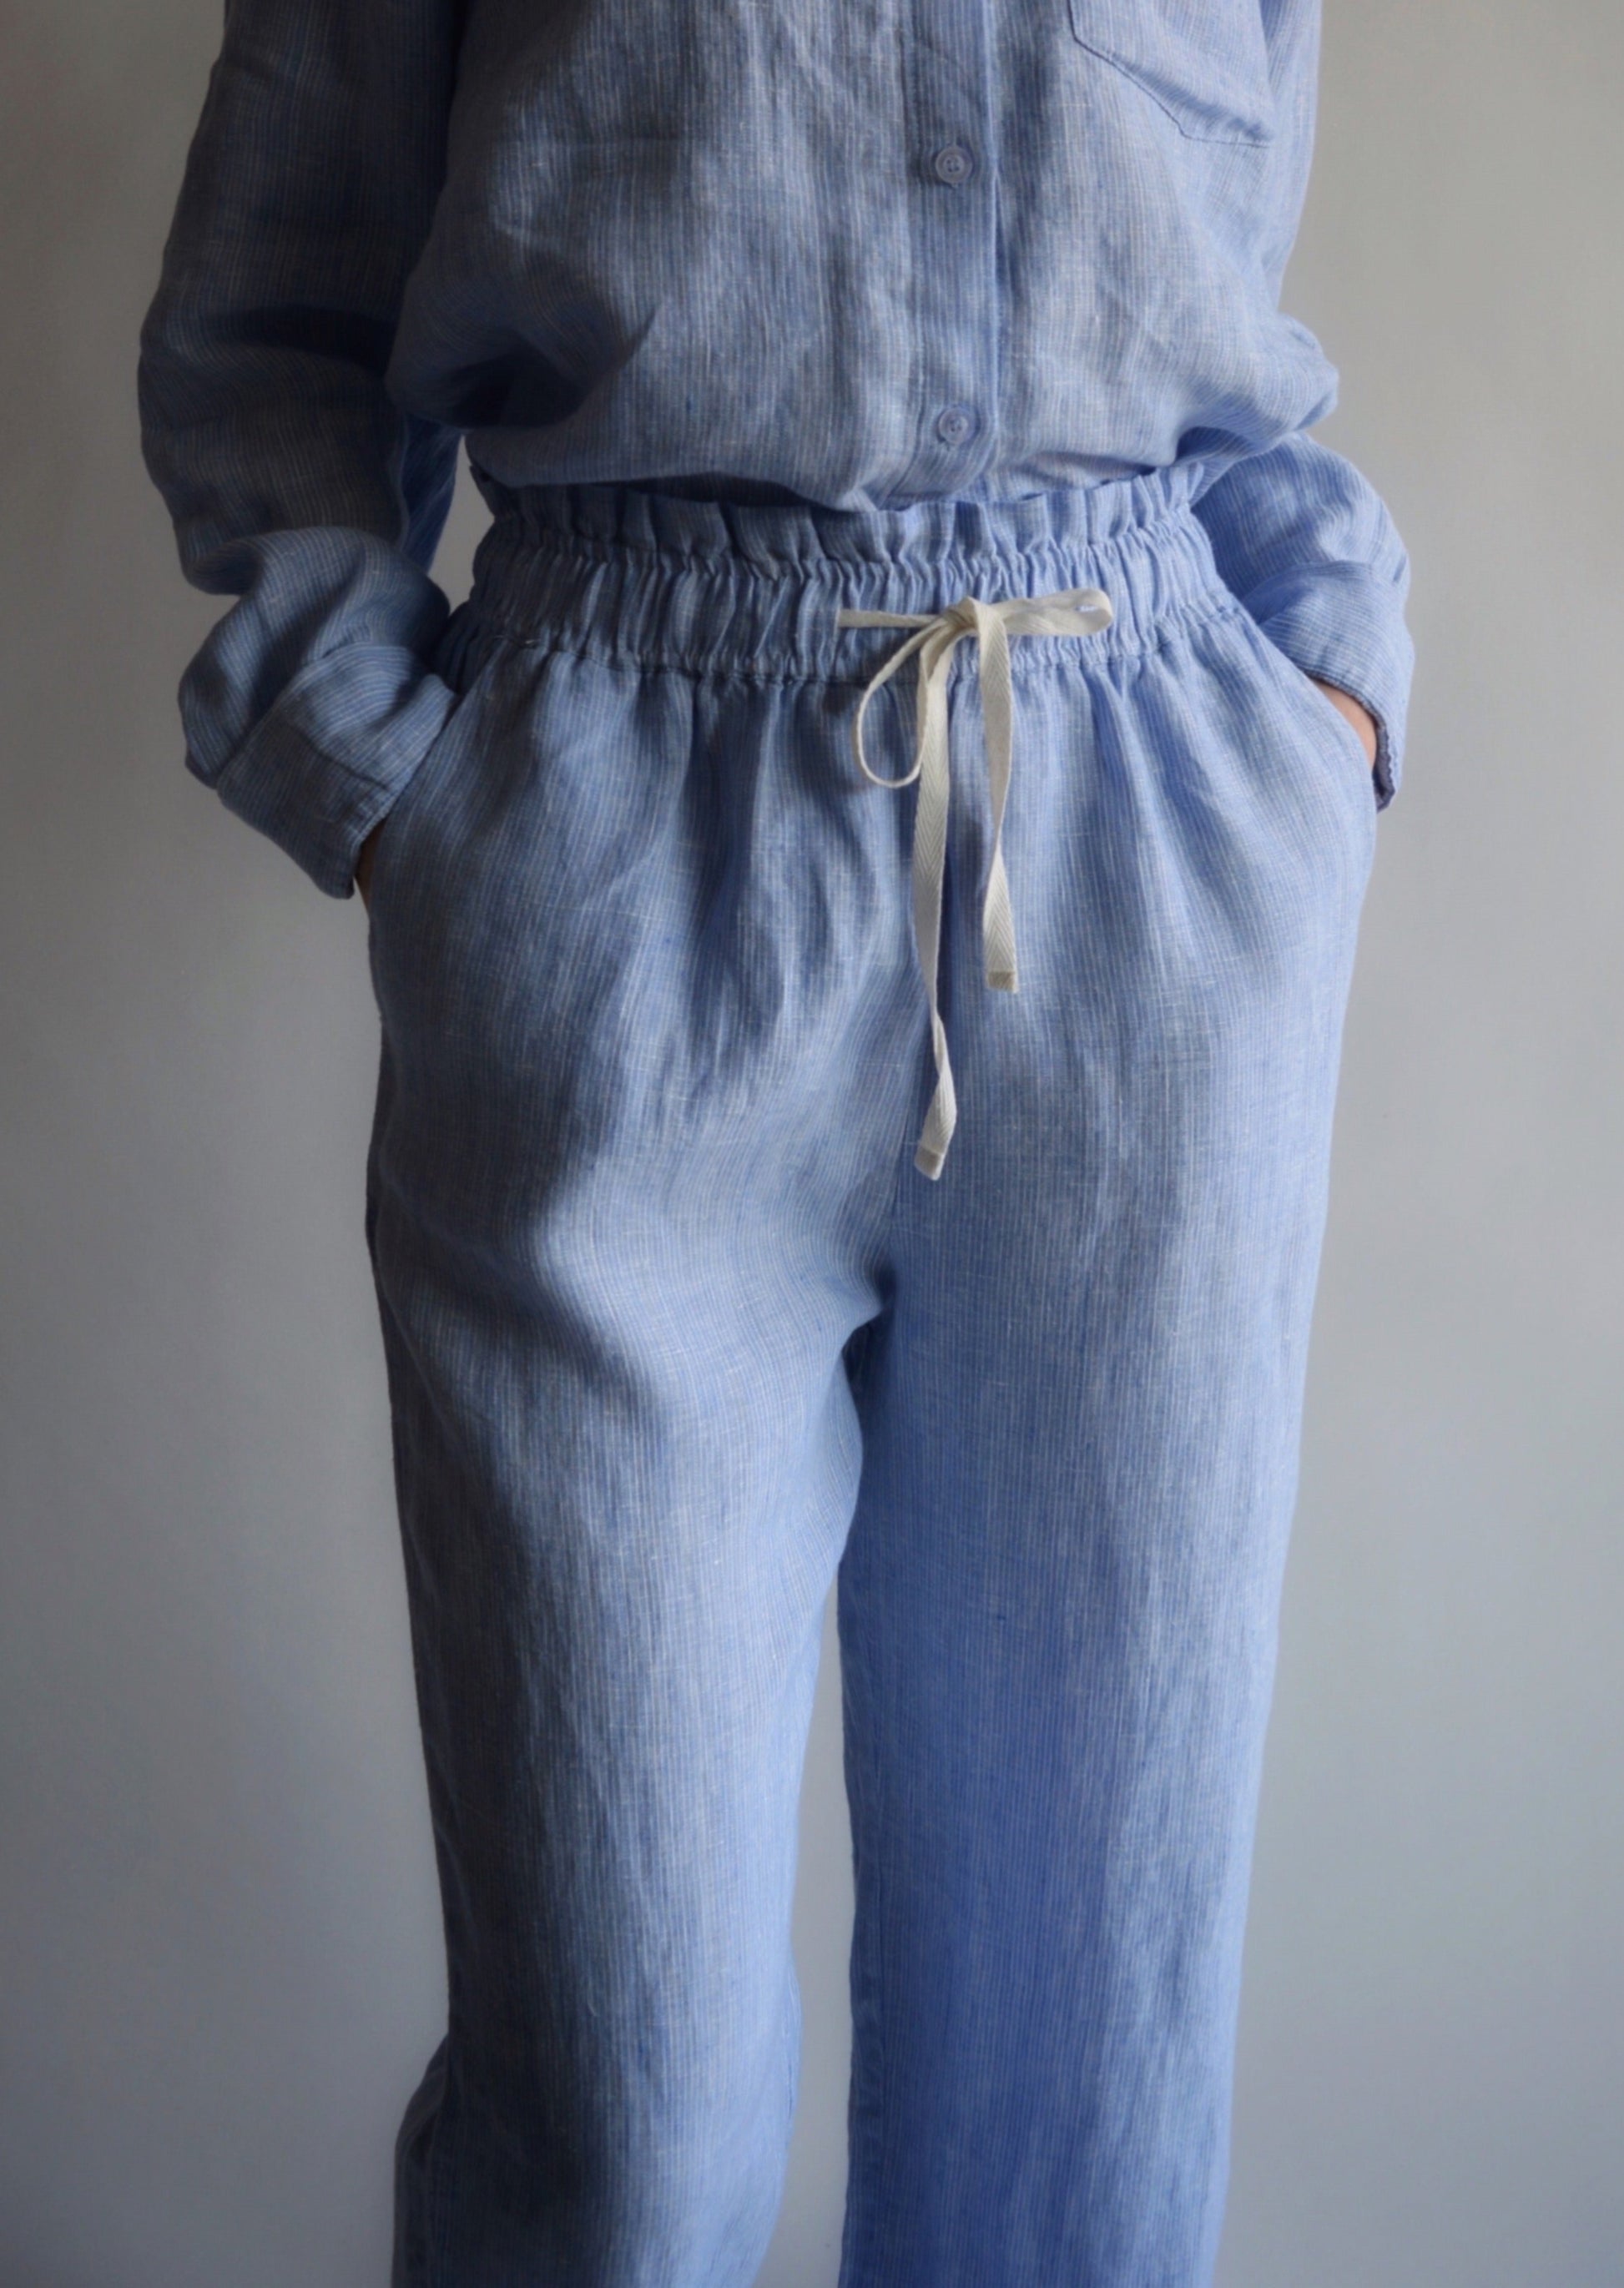 Linen Pants in Clear Sky color